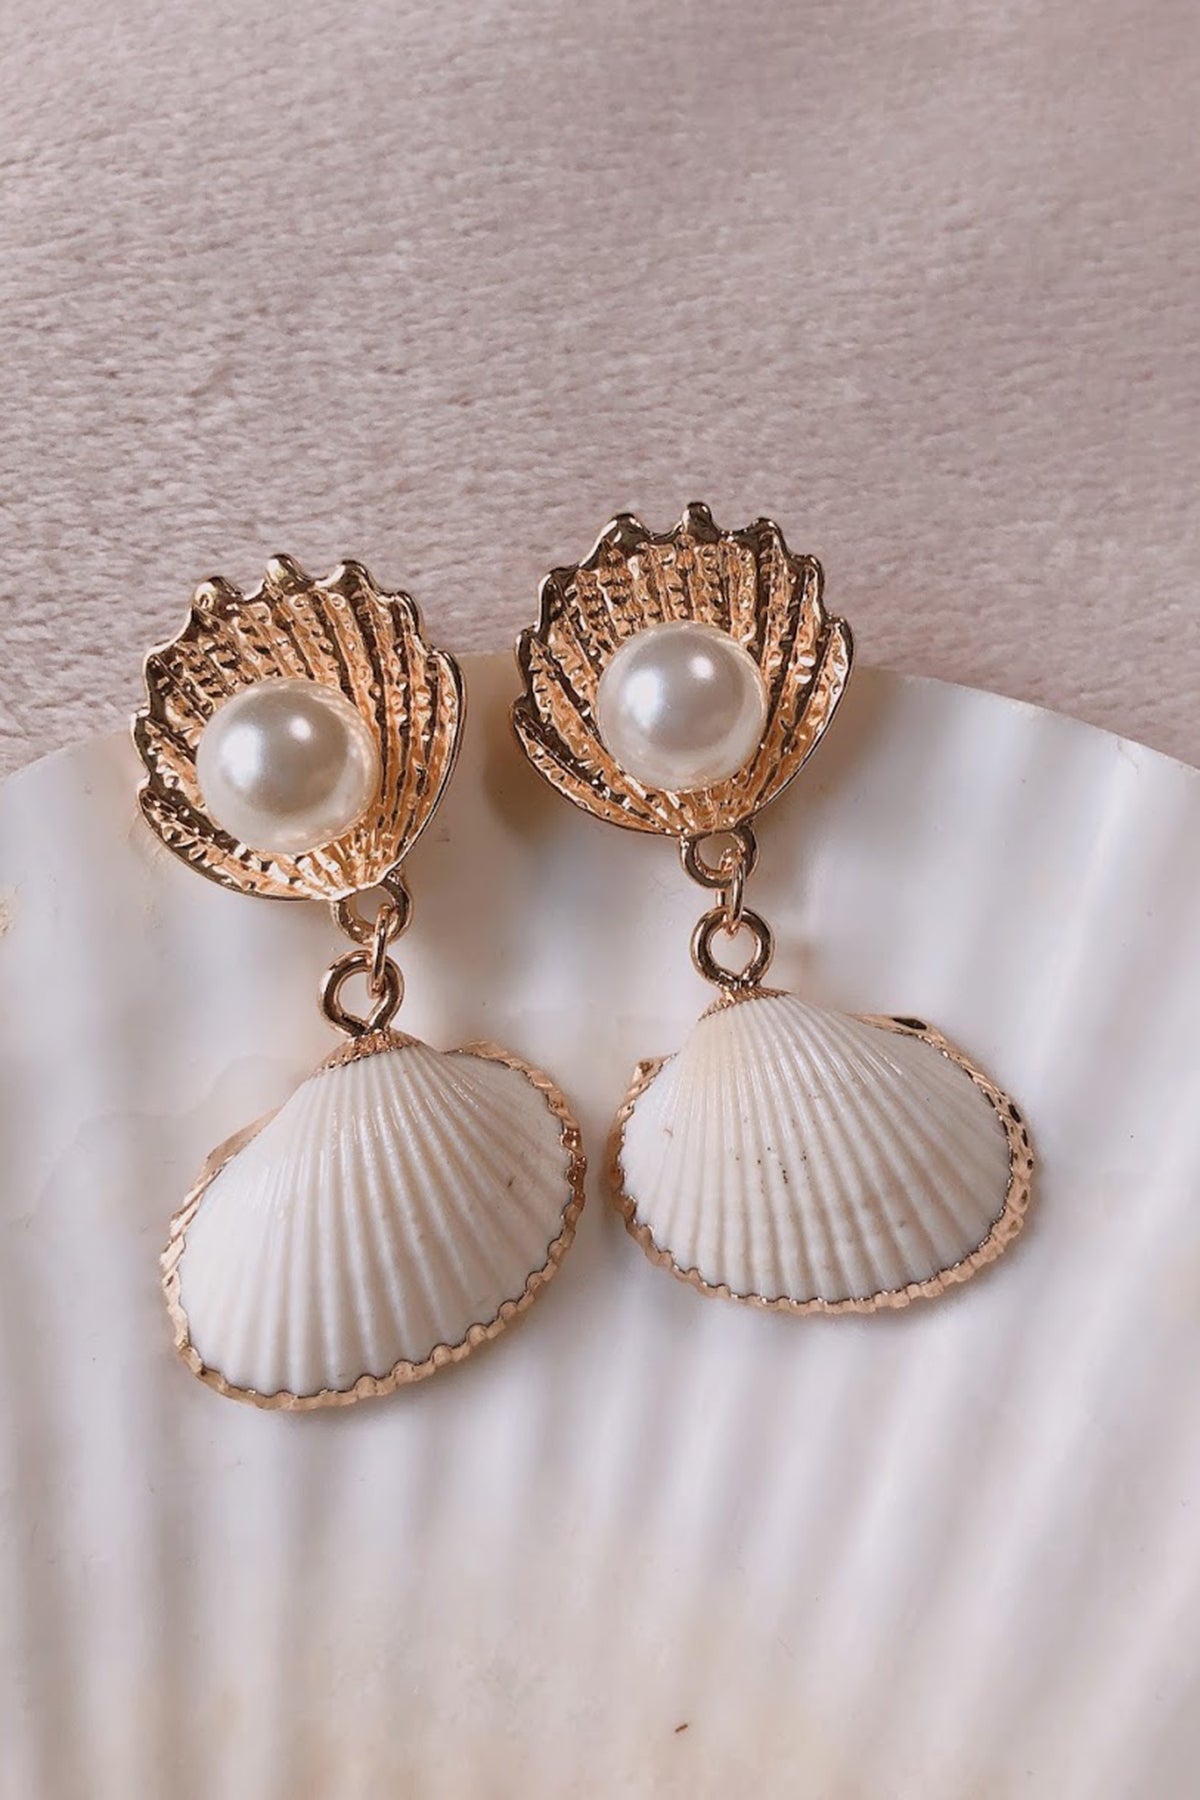 Gold Dipped Natural Shell Earrings - ShopAuthentique